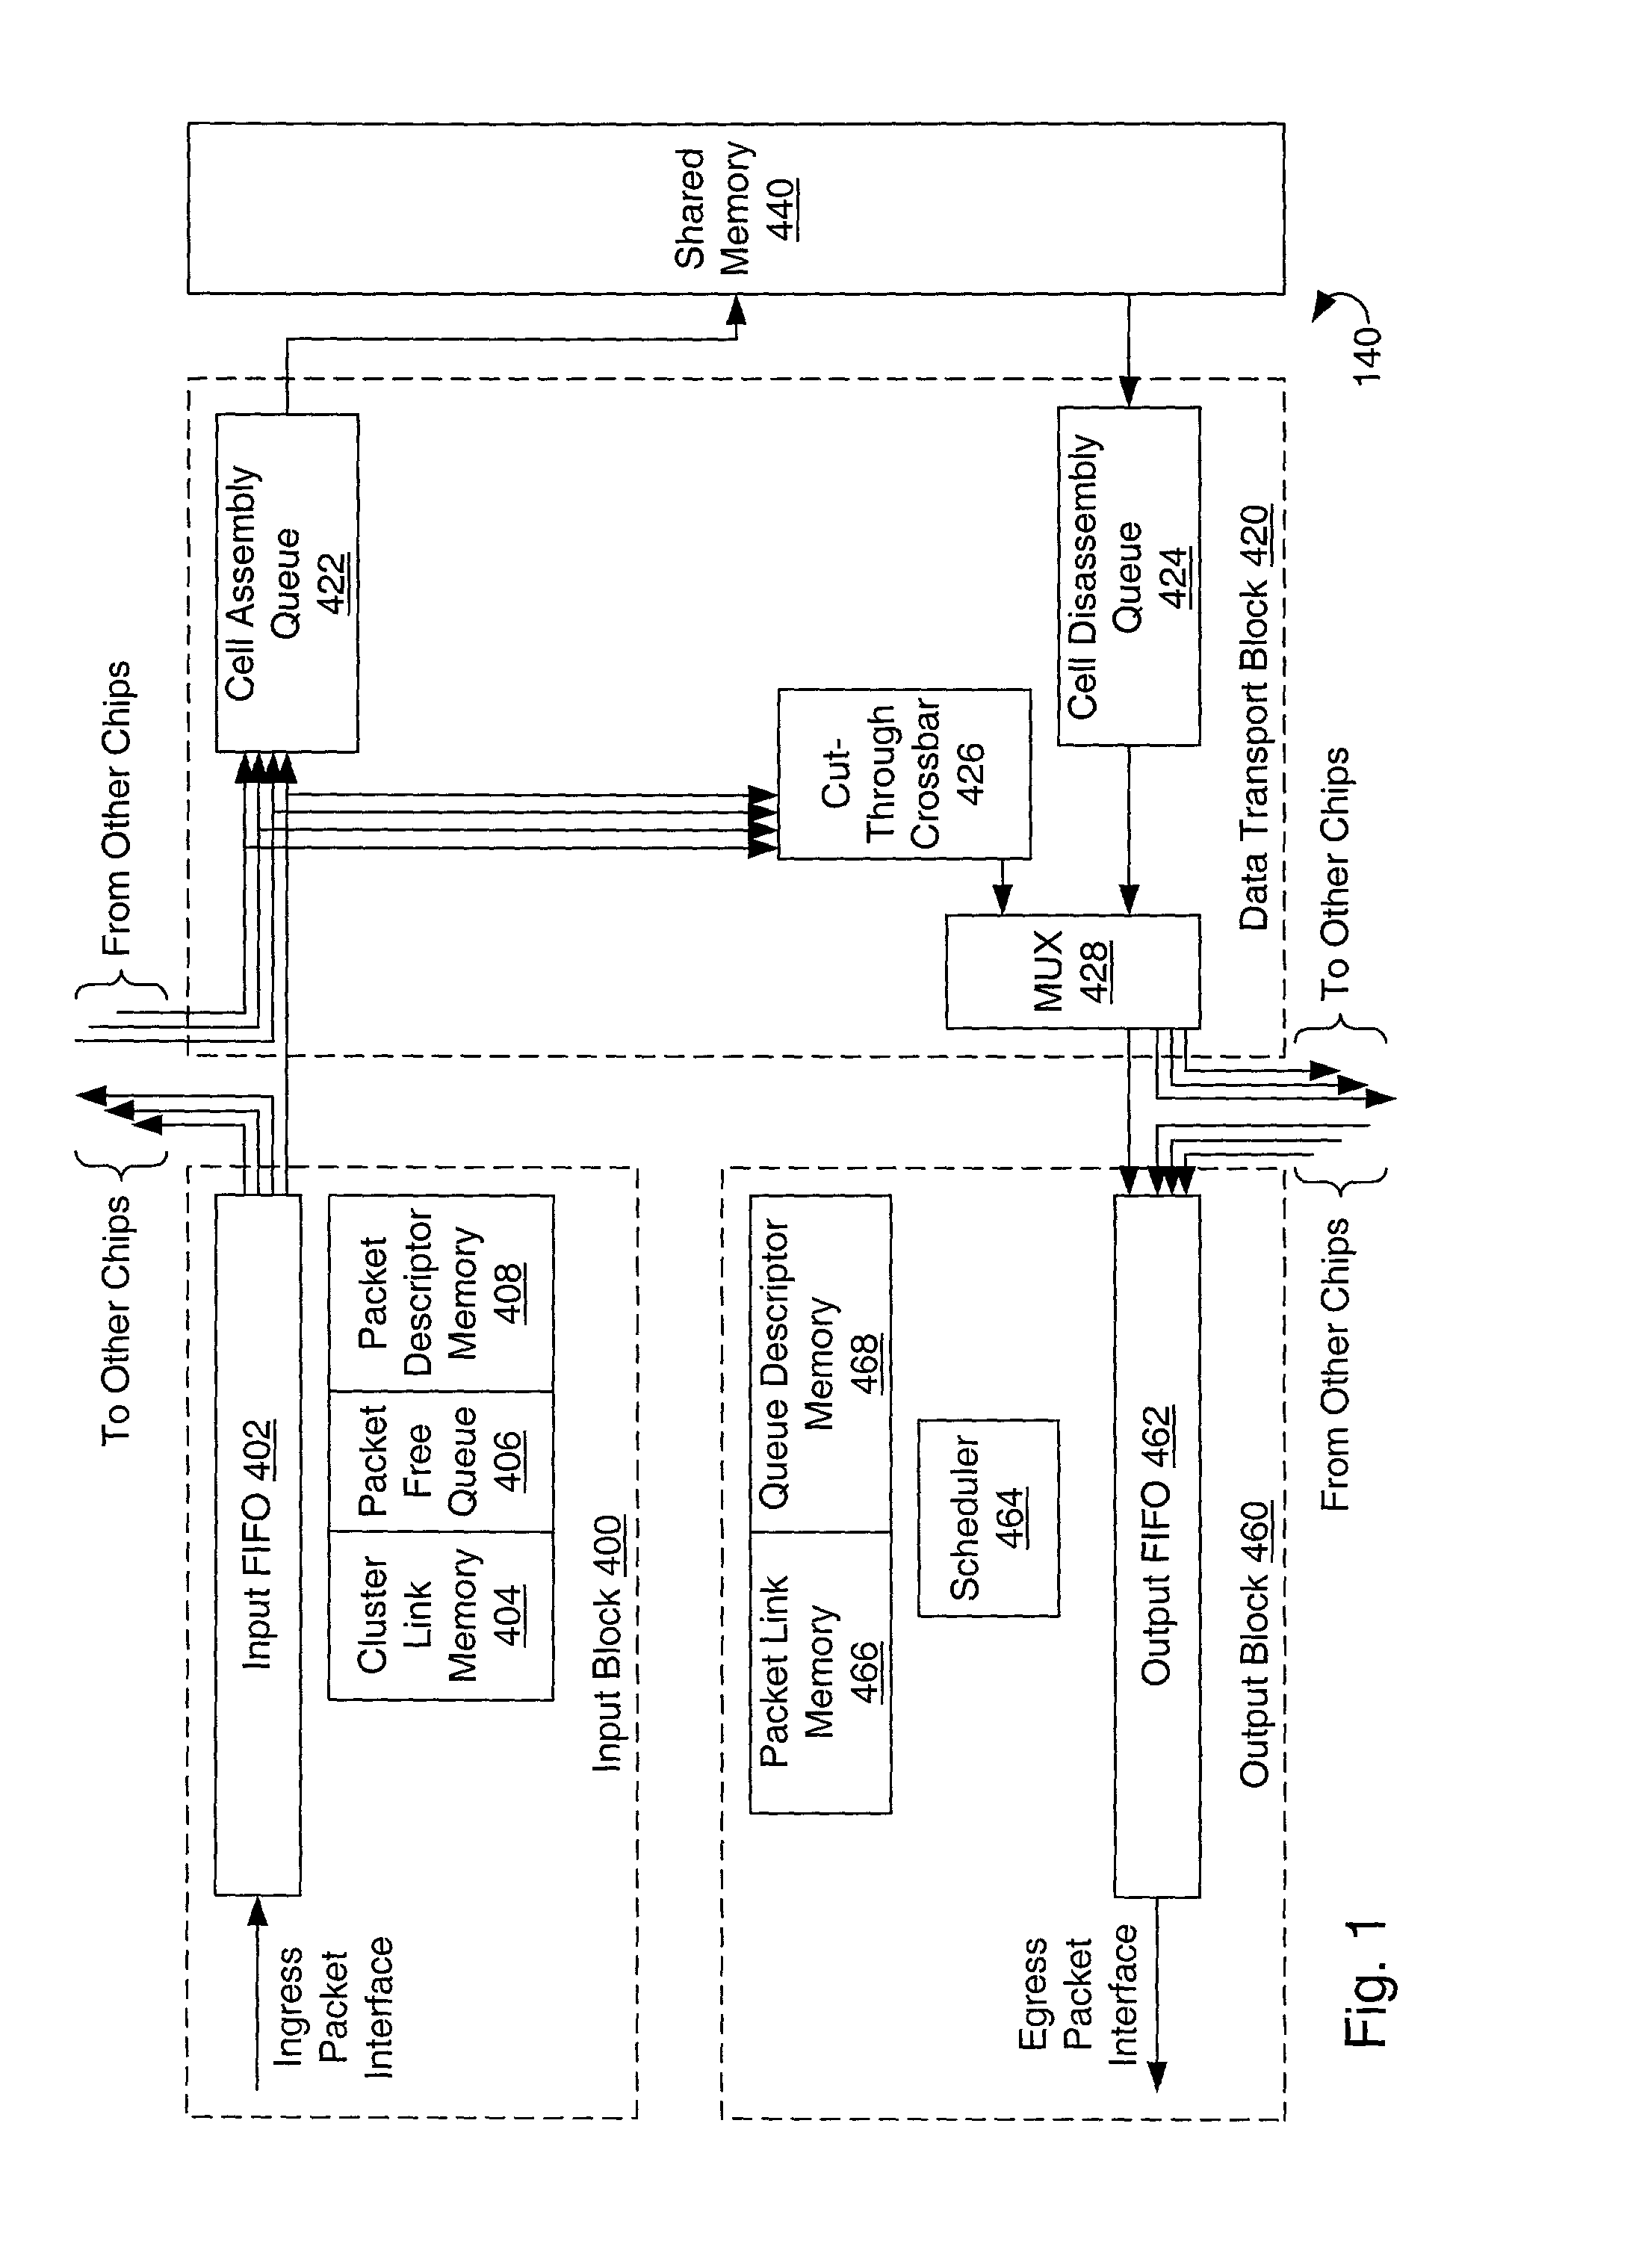 Ensuring proper packet ordering in a cut-through and early-forwarding network switch